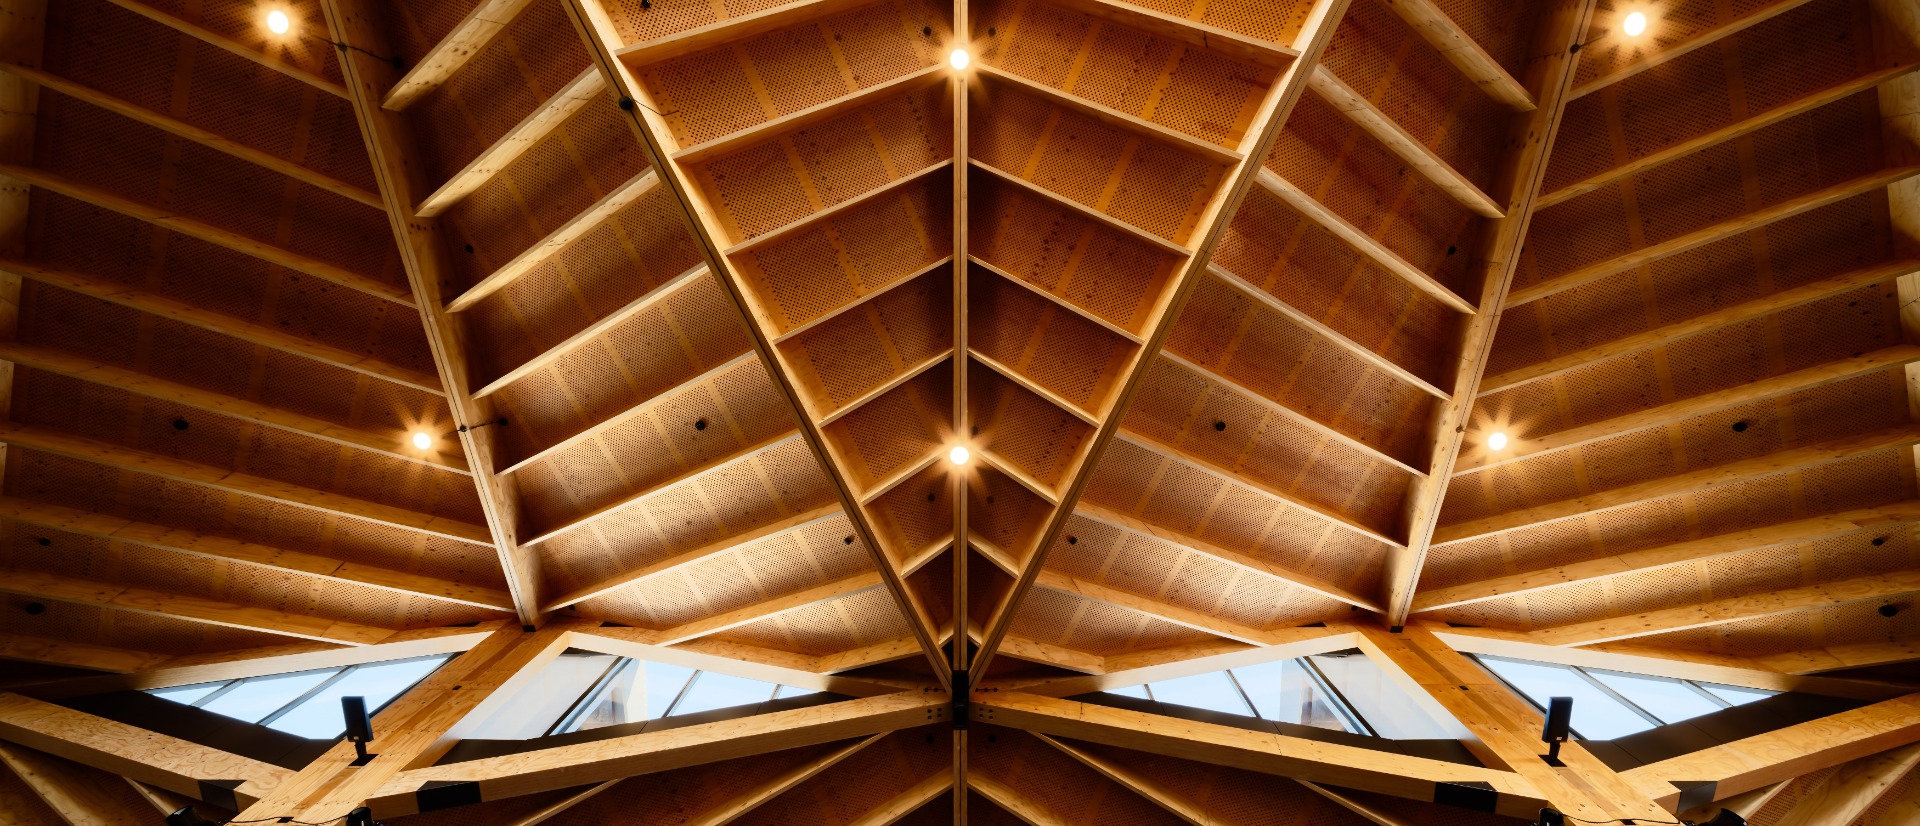 The articulated timber ceiling of Nelson Airport Terminal